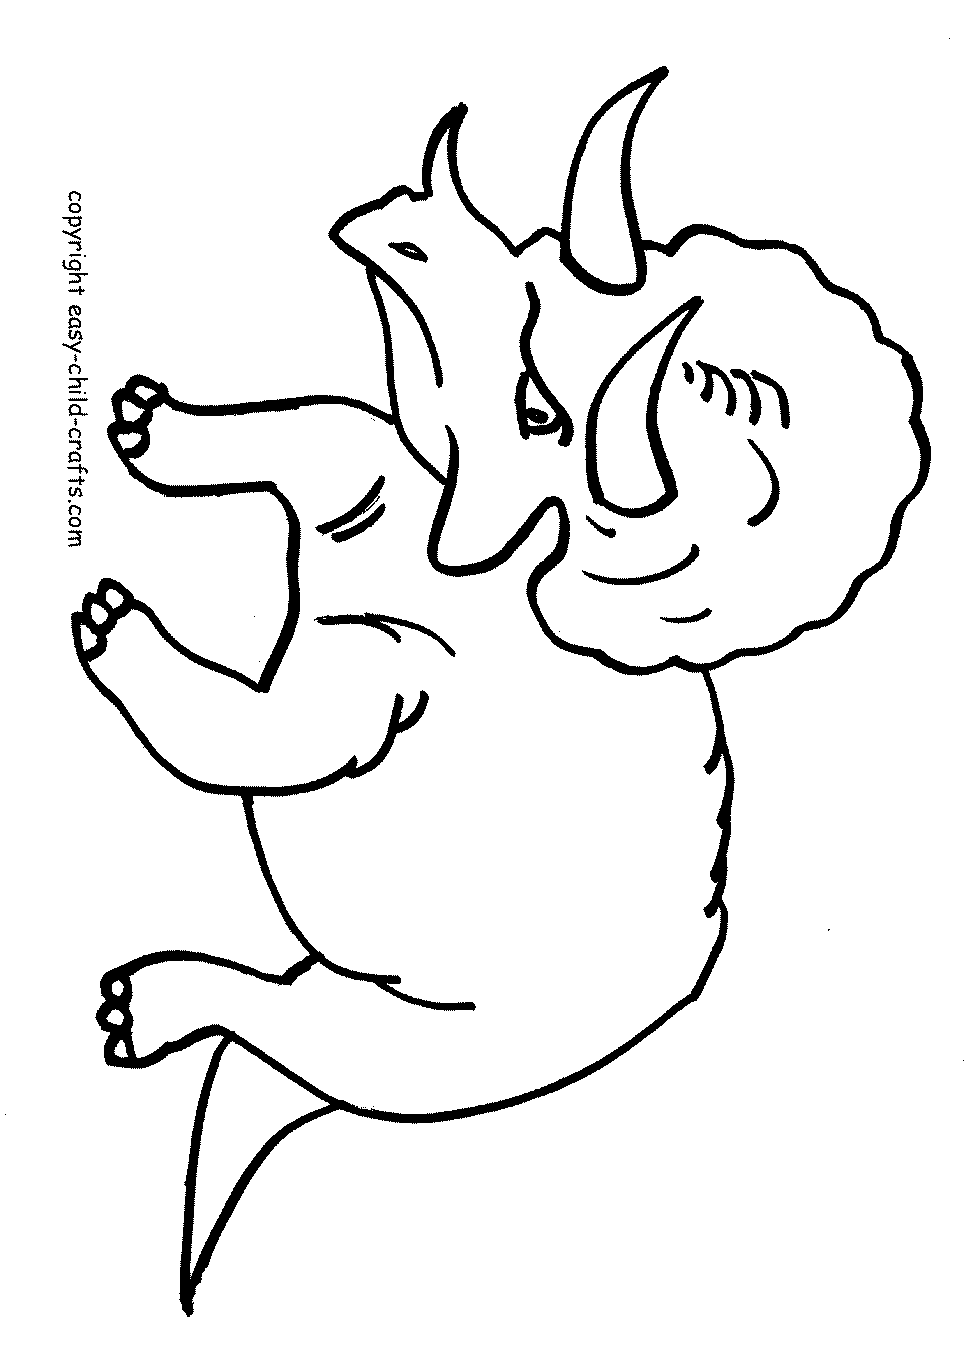 dinosaur for coloring free coloring pages dinosaur coloring pages dinosaur for coloring 